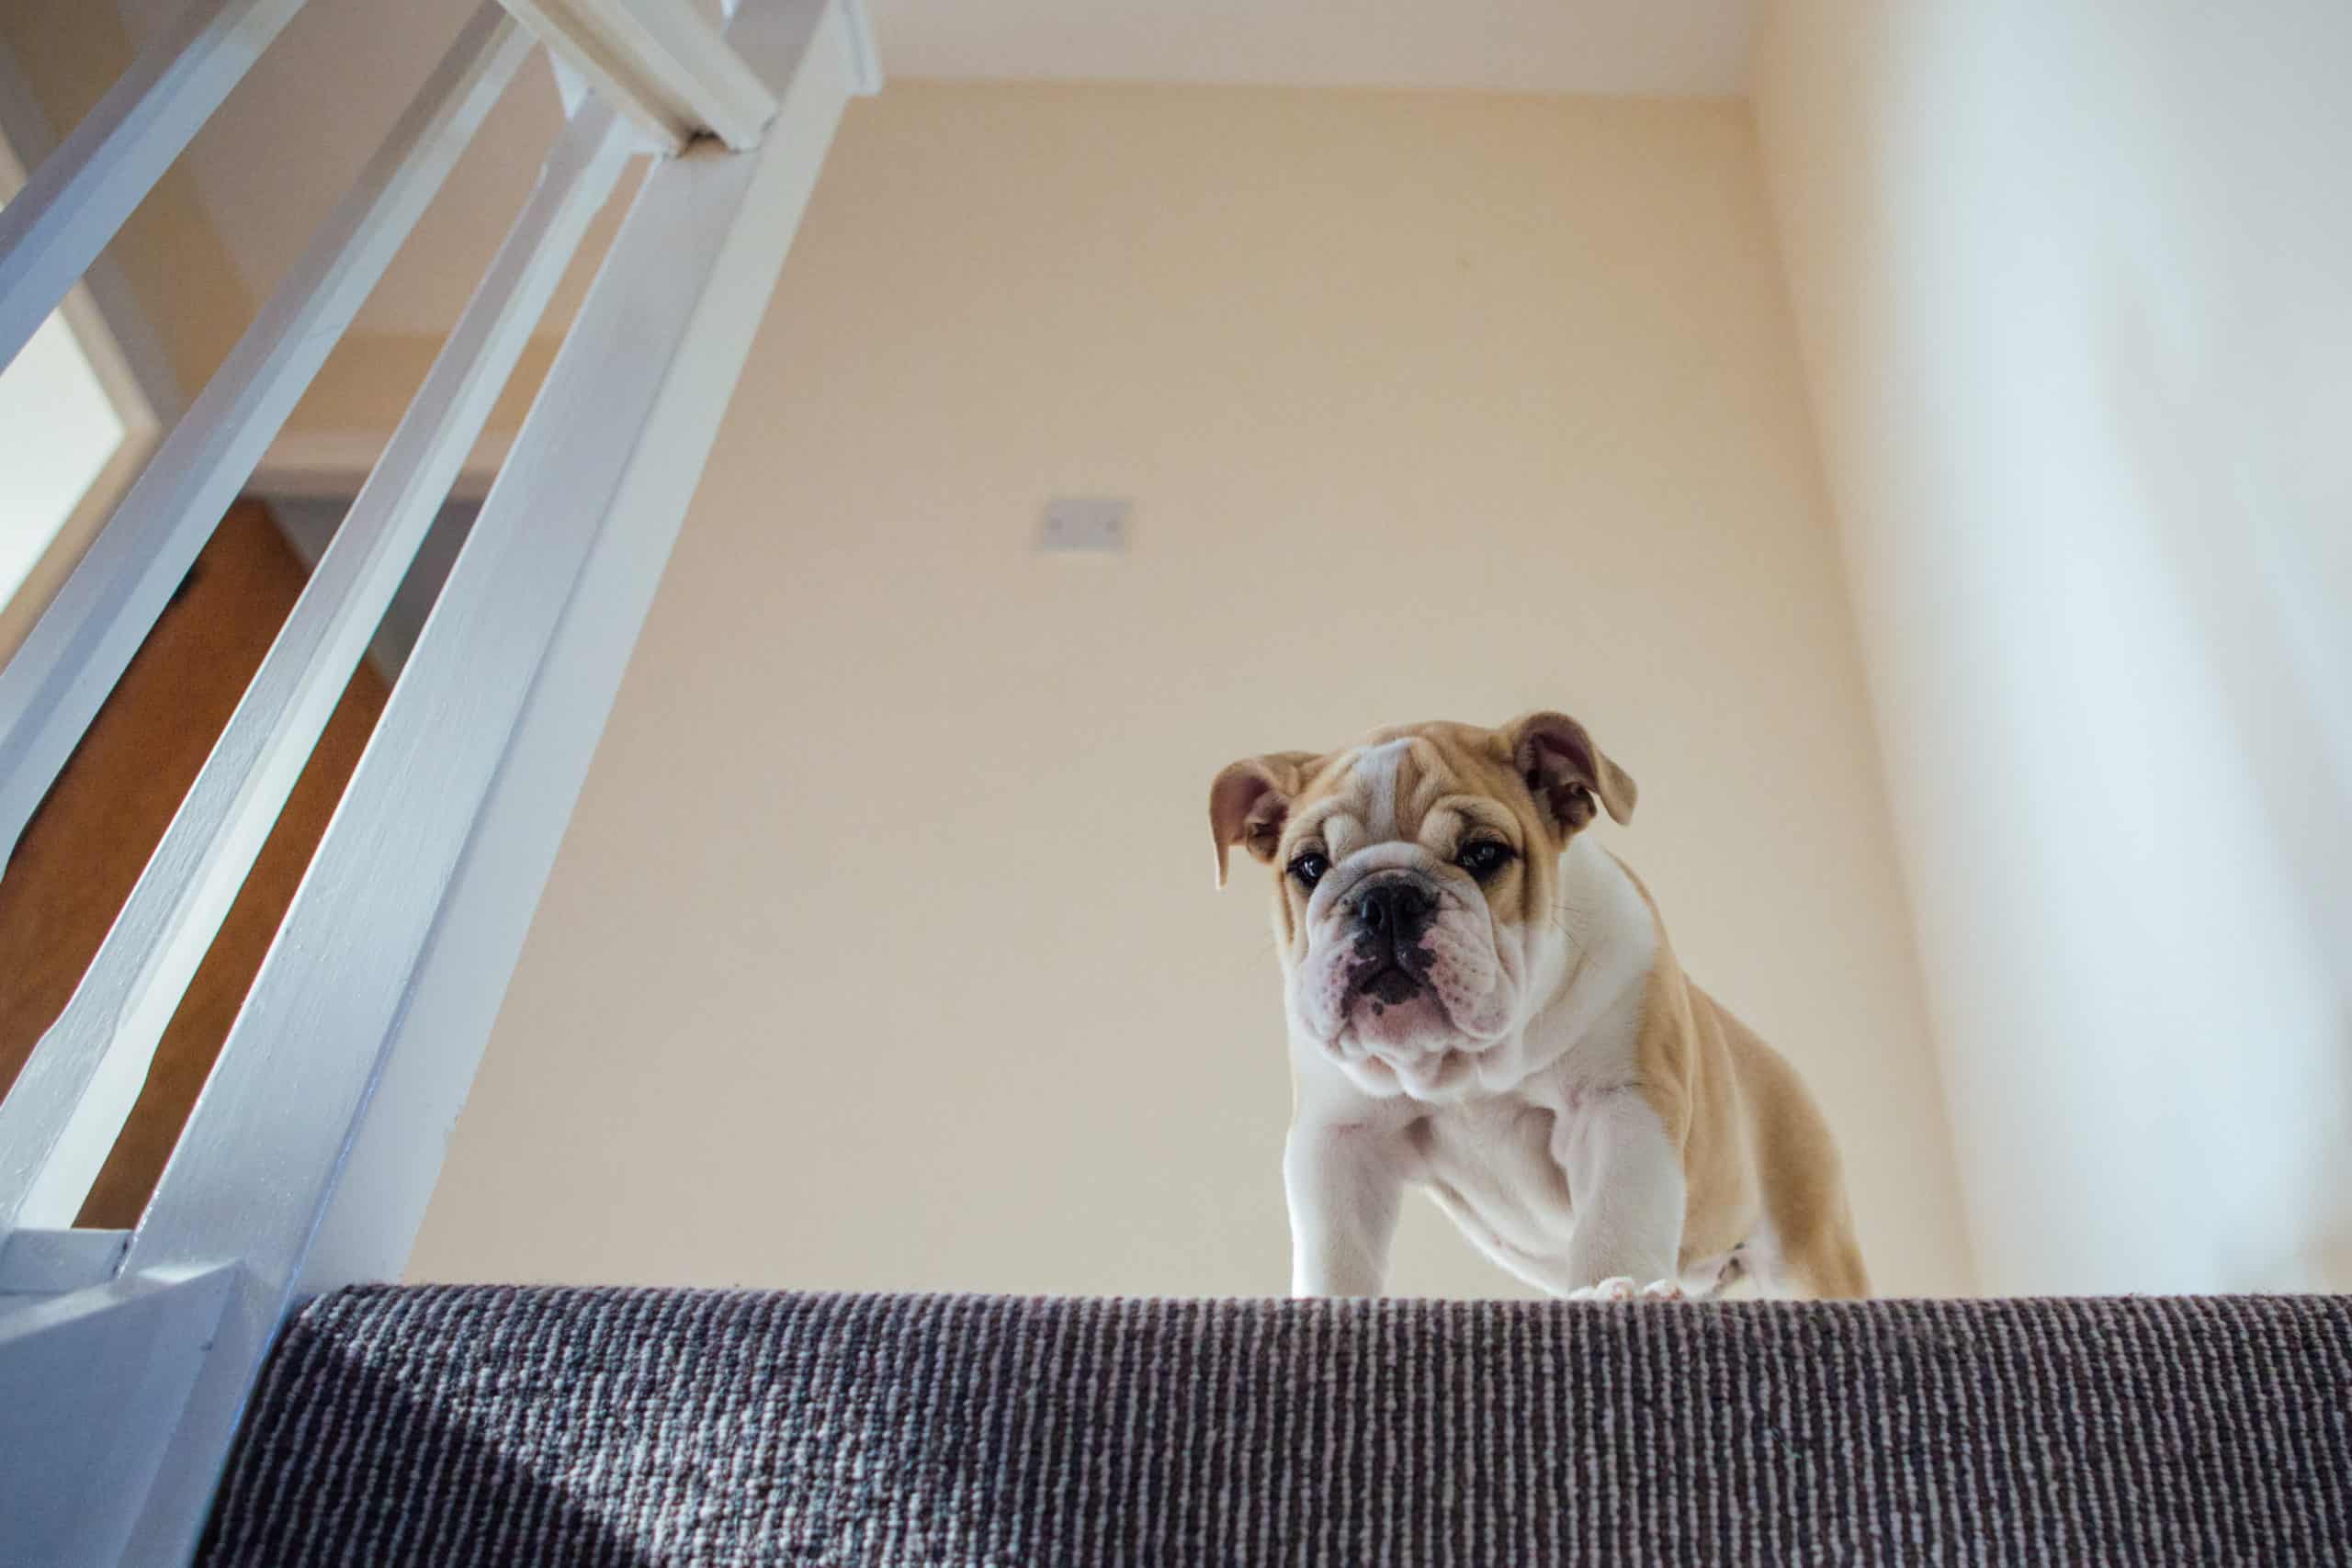 Why does my dog follow me upstairs?